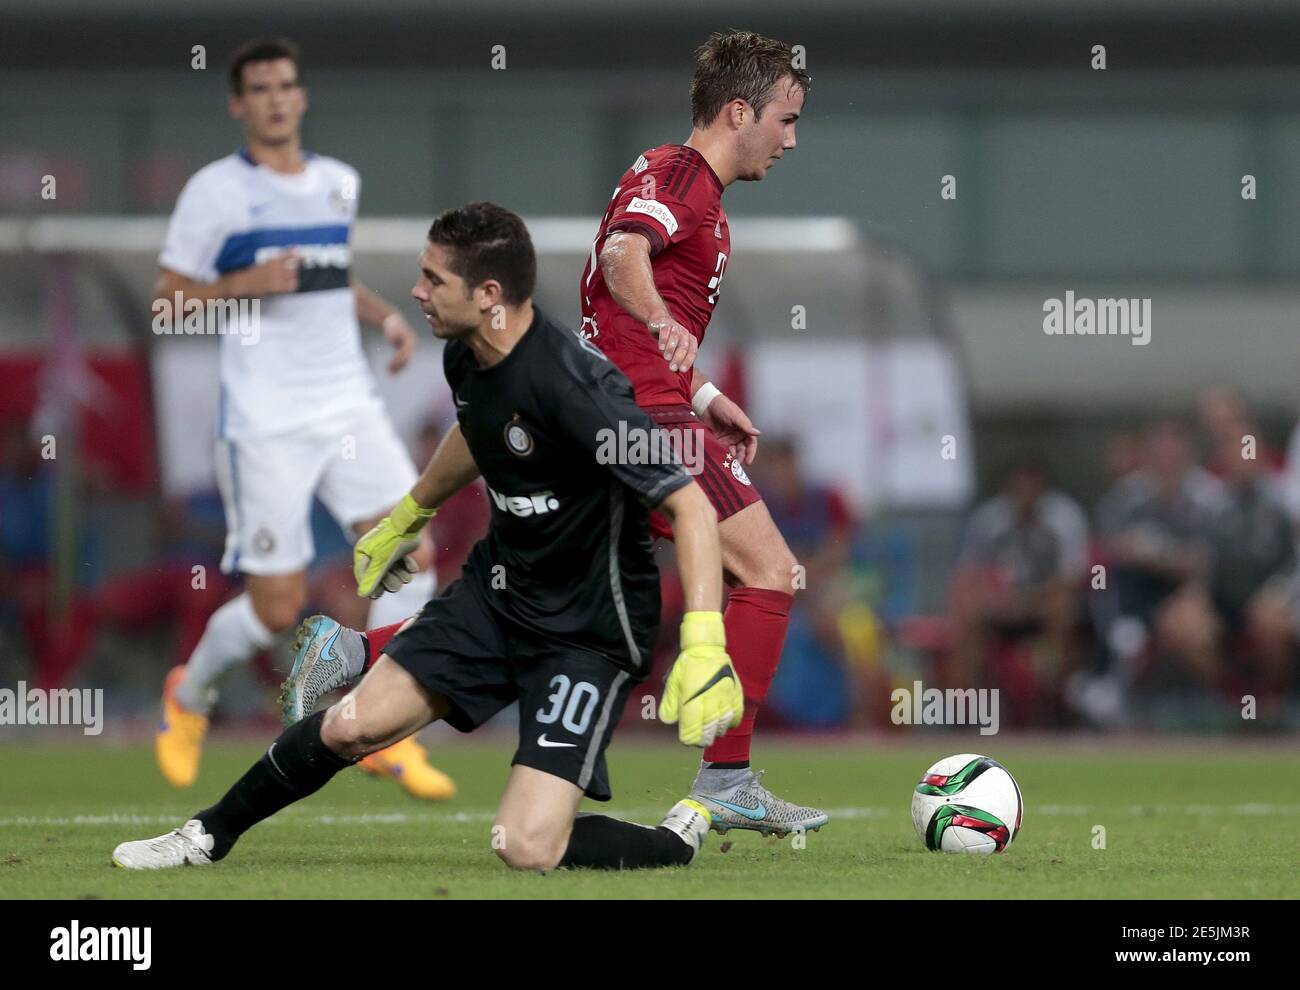 Mario Gotze (R) of FC Bayern Munich fights for the ball with Juan Pablo Garrizo of FC Internazionale during their team's friendly match in Shanghai, July 21, 2015. REUTERS/Aly Song Stock Photo